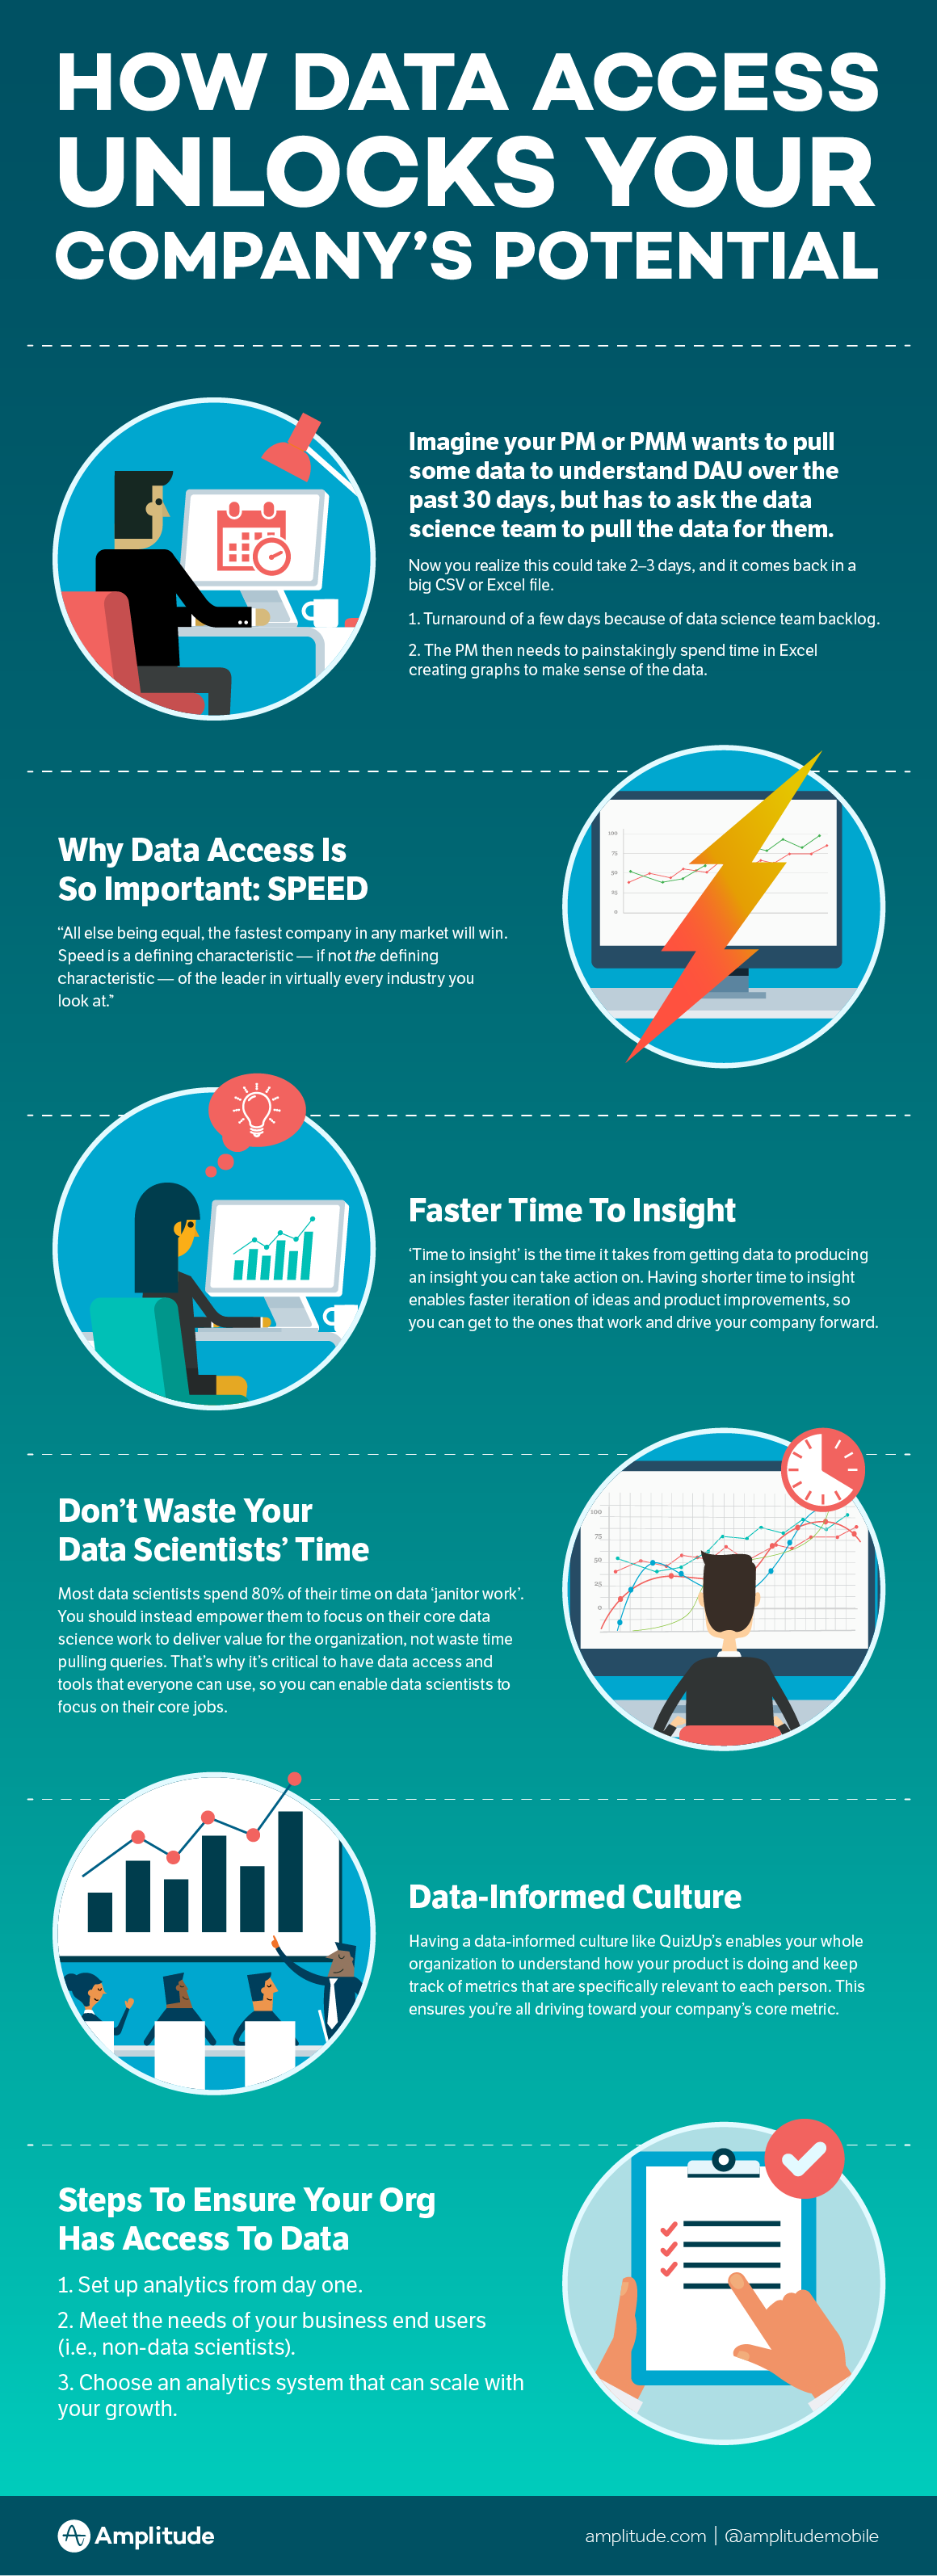 data-access-infographic-1-01